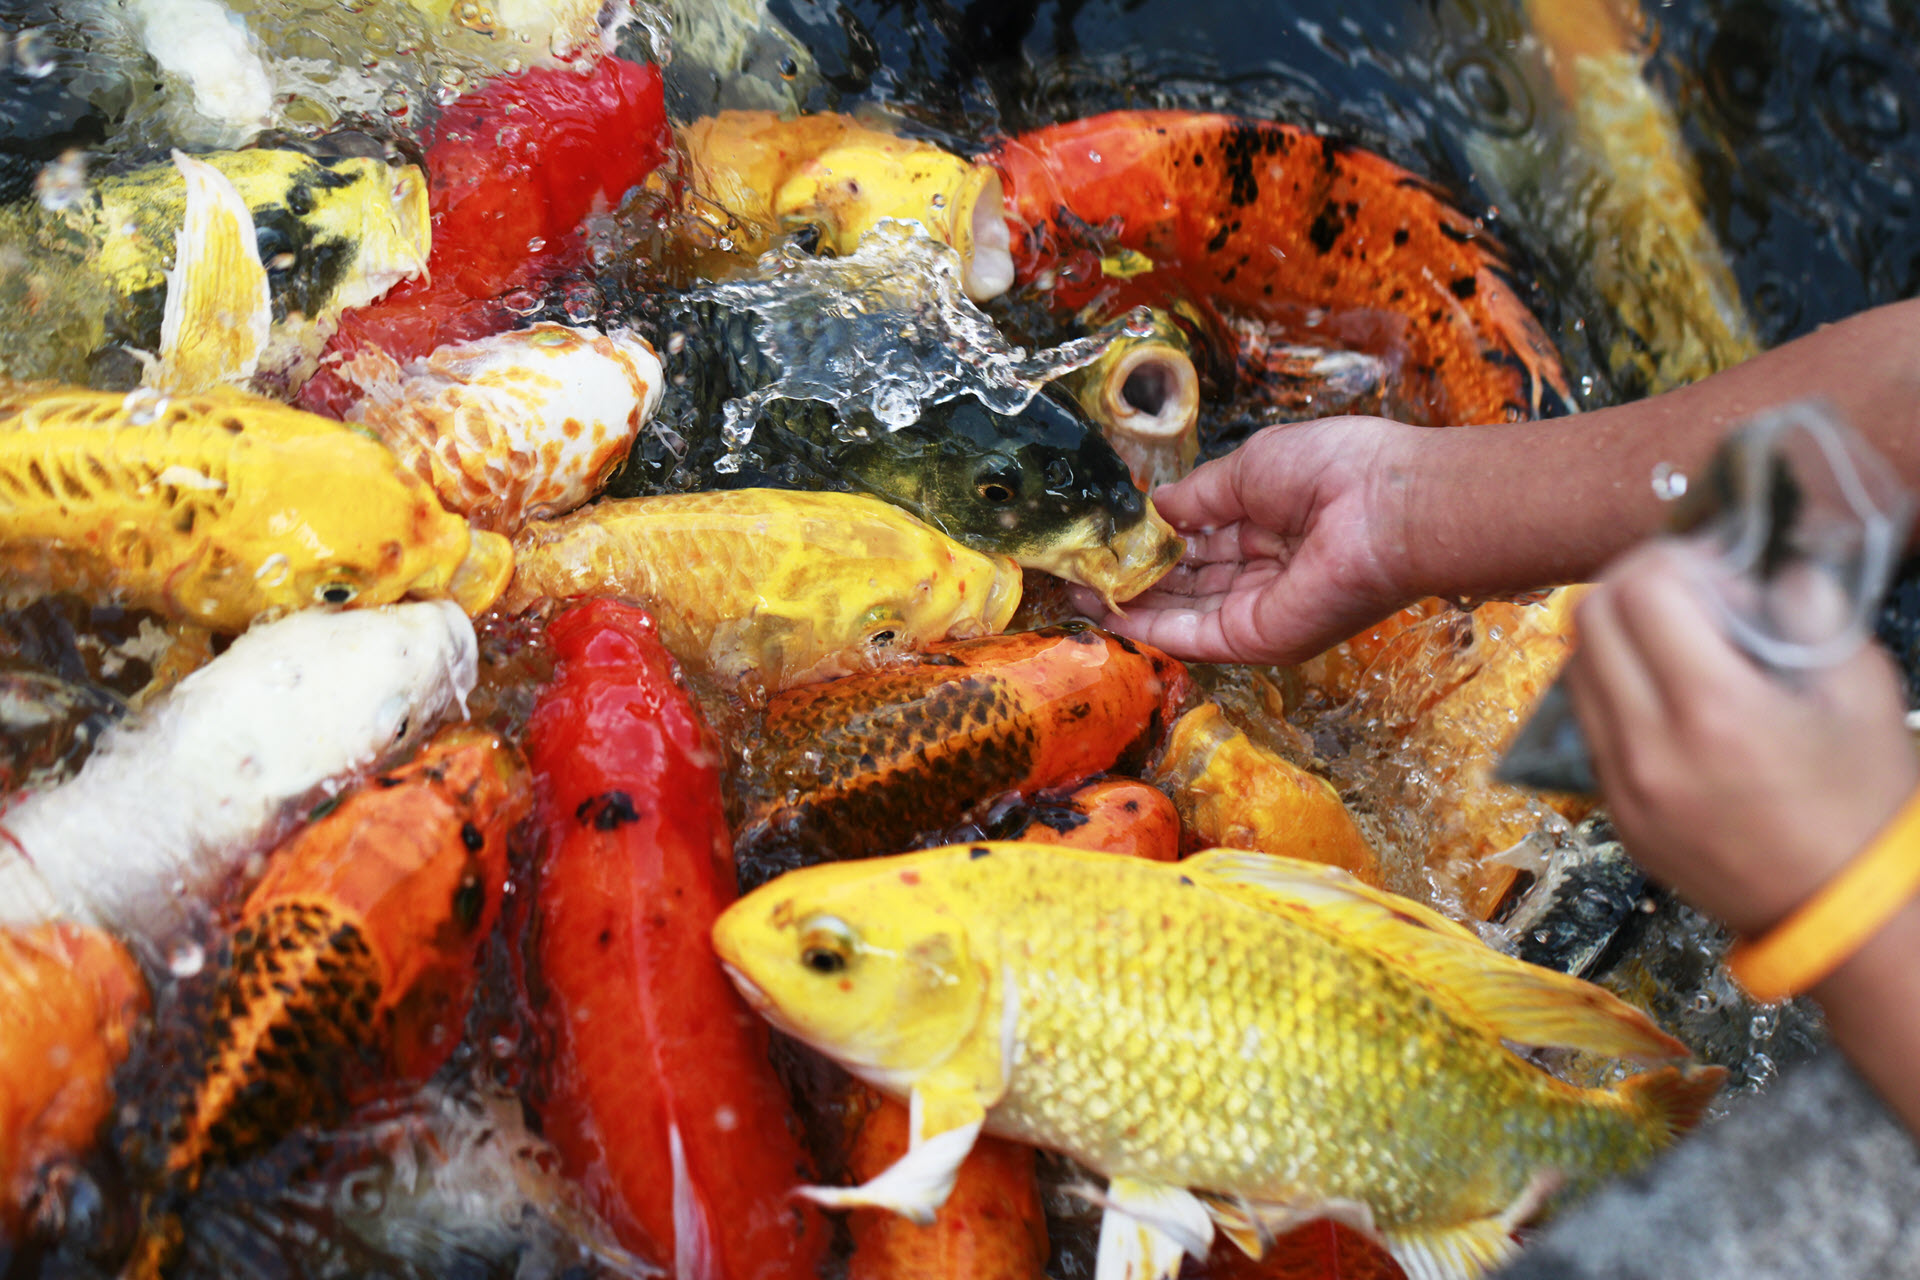 How many times we need to feed fish?